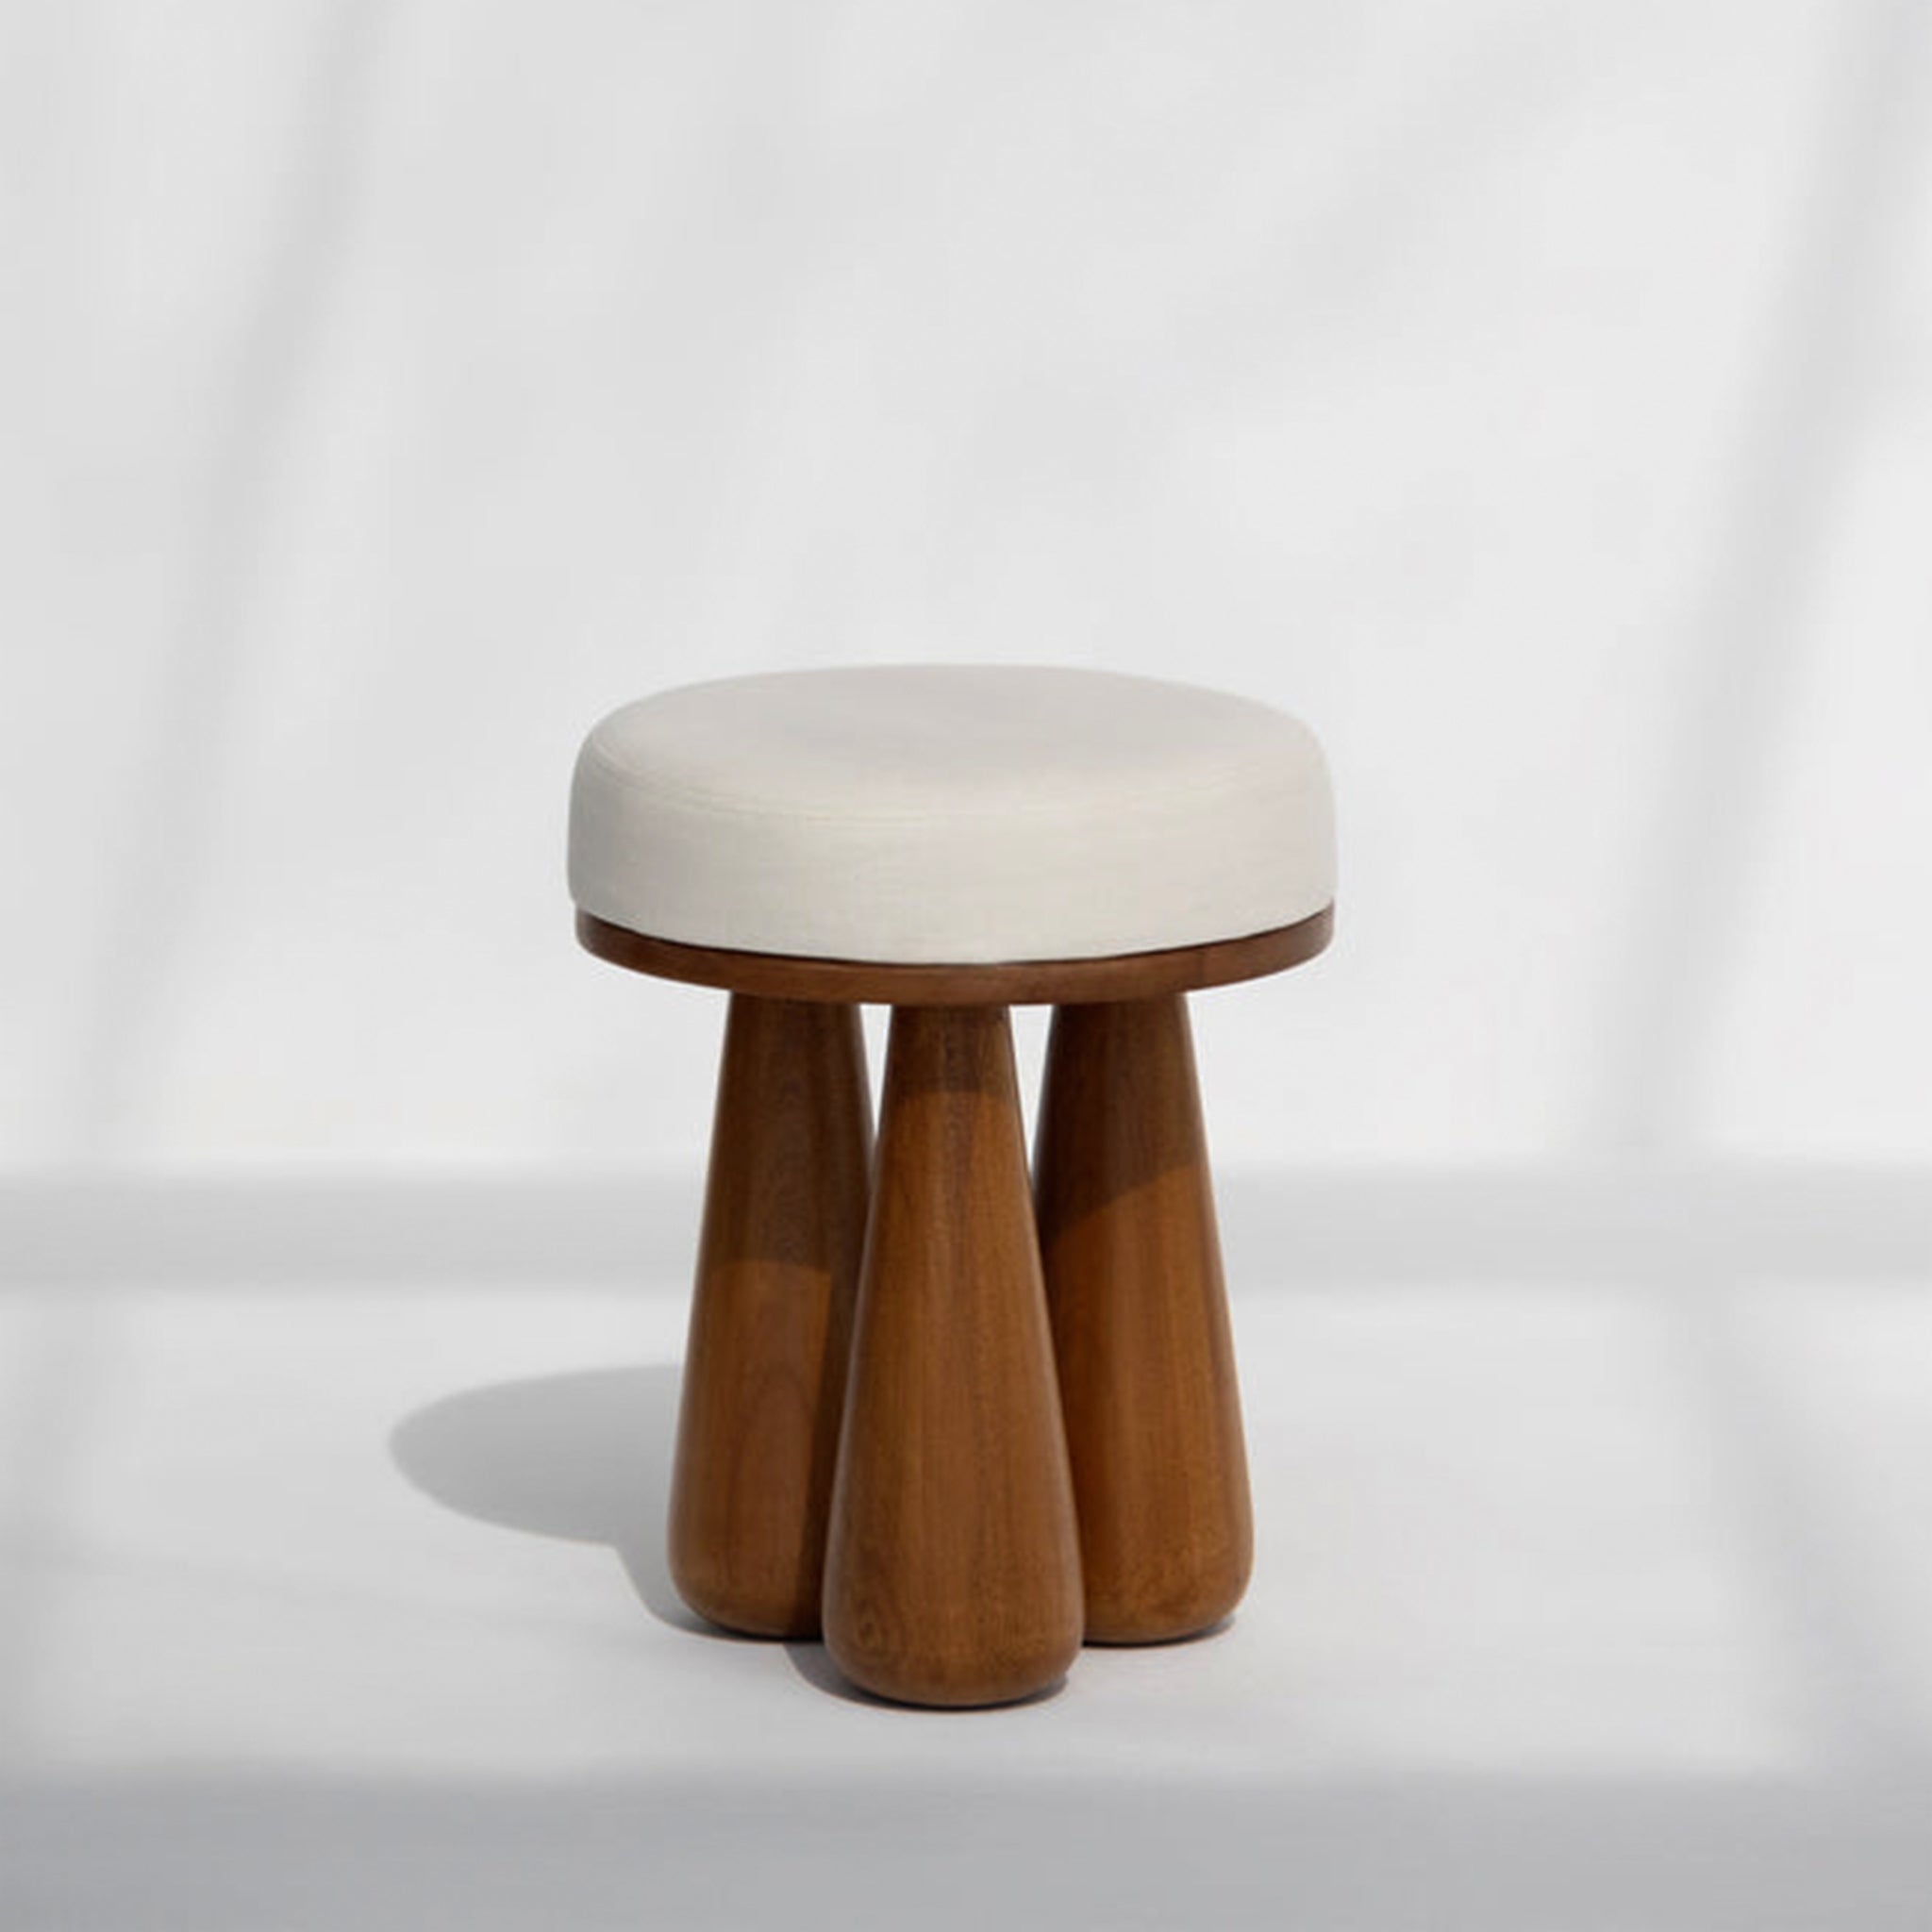 Wooden stool with chunky, tapered legs and a round, upholstered white seat in a sunlit room